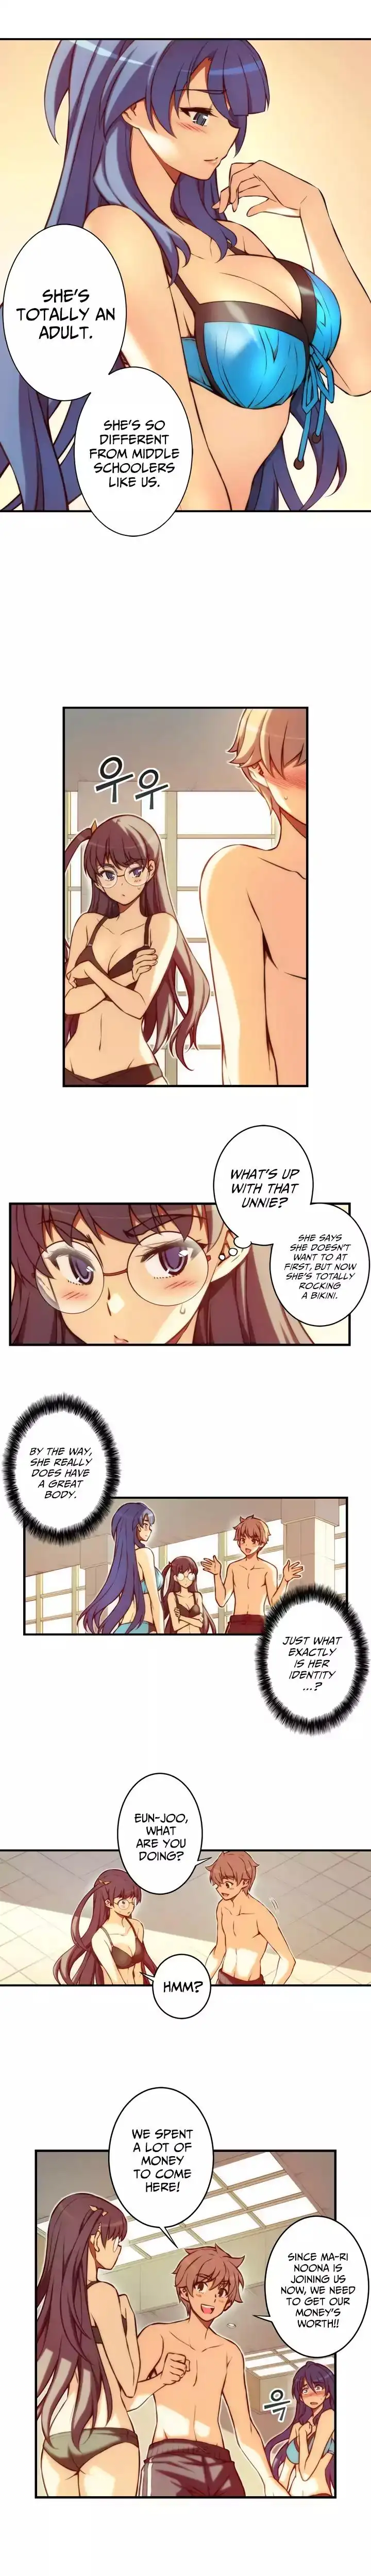 The Fiancées Live Together - Chapter 42 Page 5